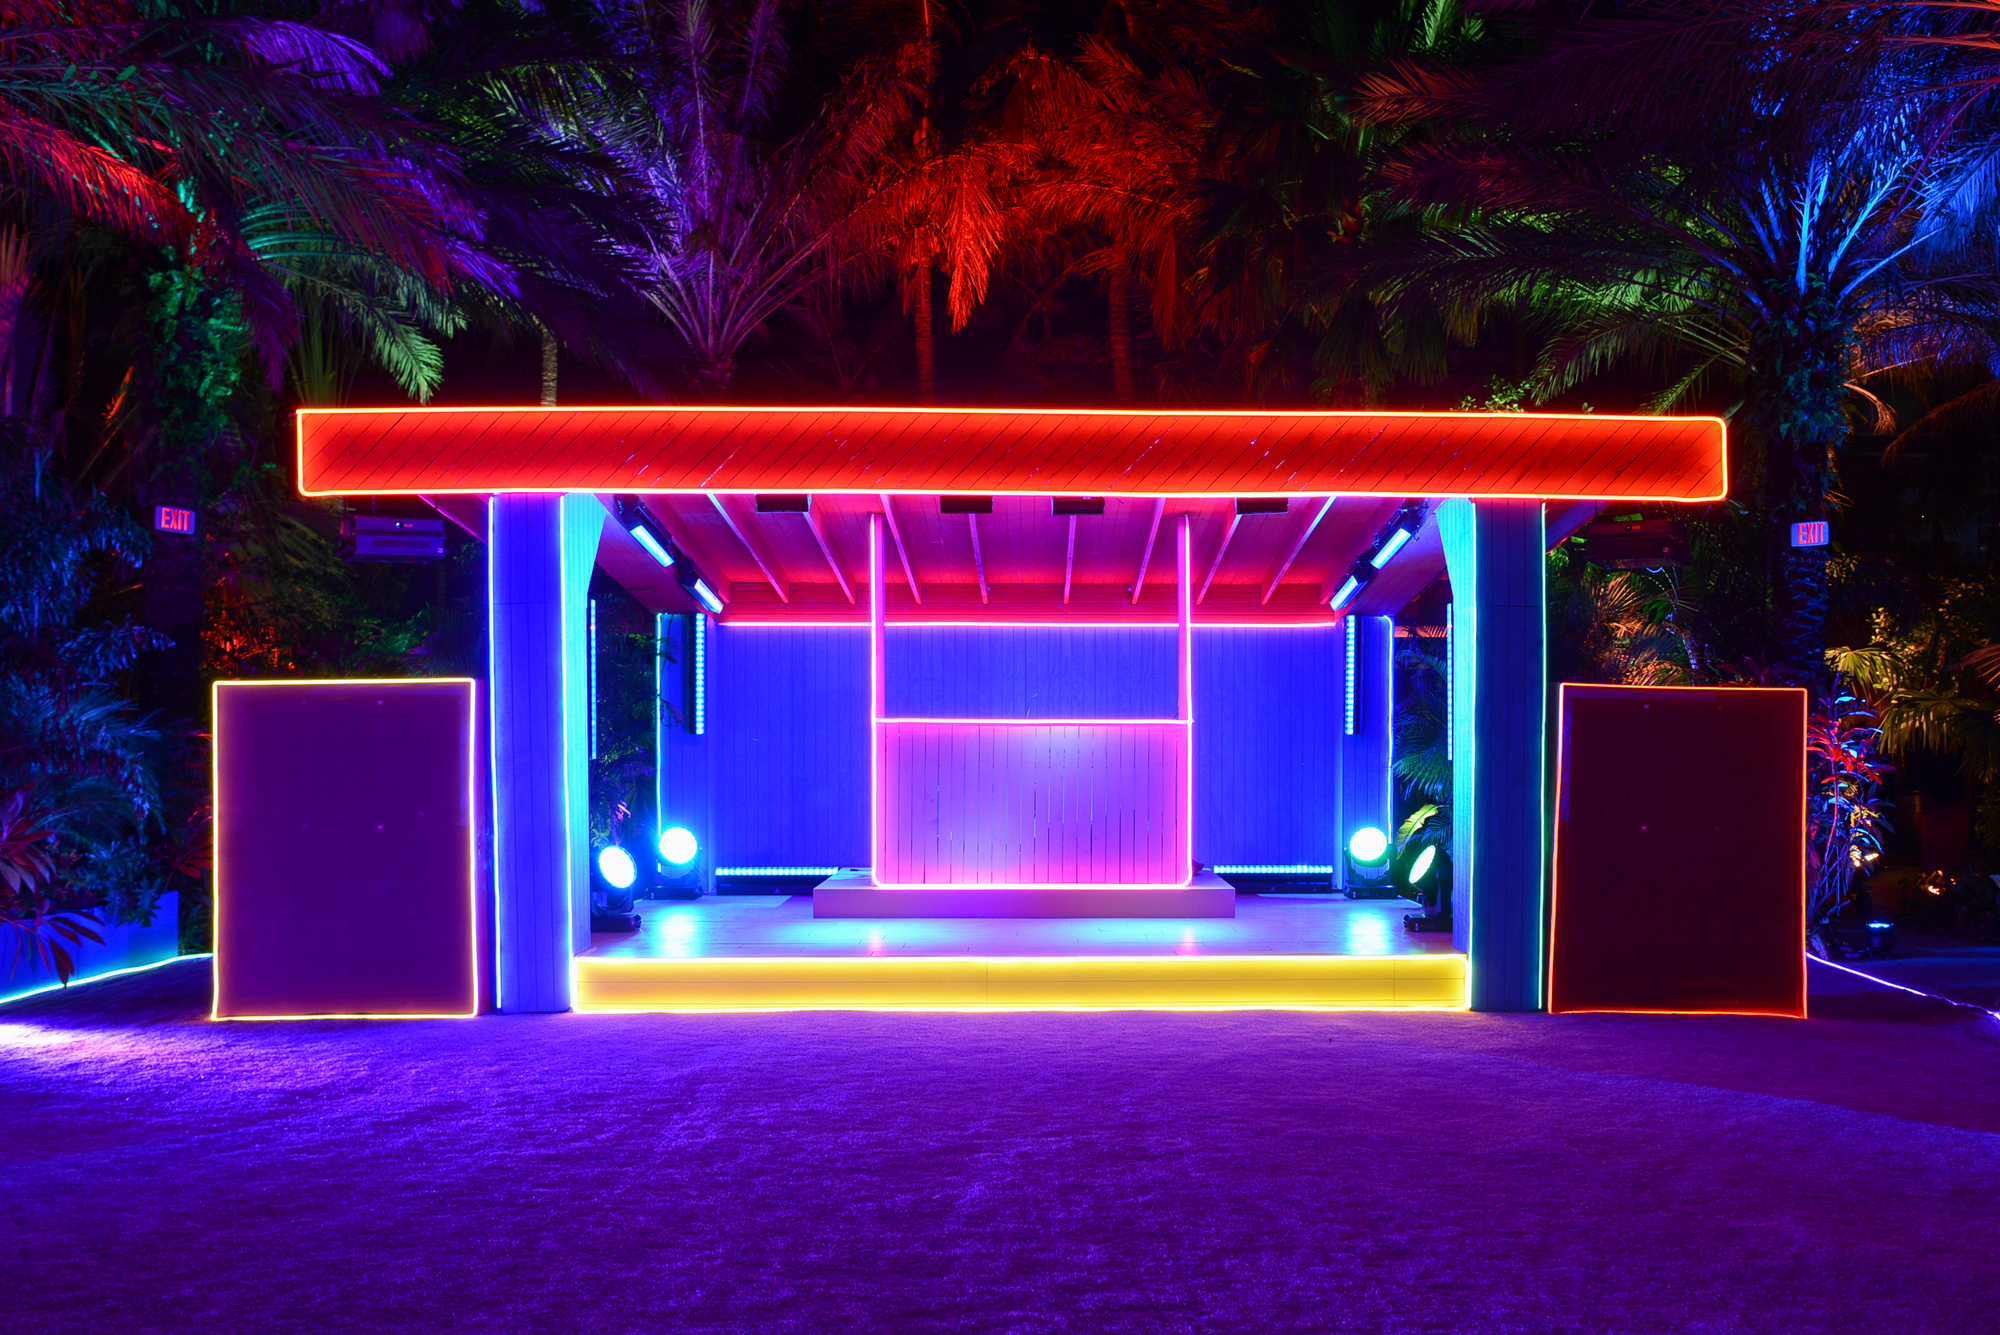 A symmetrical, blocky pavilion serving as part of the Prada Double Club Miami is outlined with lines of neon lights in shades of red, pink, blue, yellow, and orange. The sand in front of the pavilion has a violet hue, and the trees in the background are illuminated by green, blue, red, and purple lights.